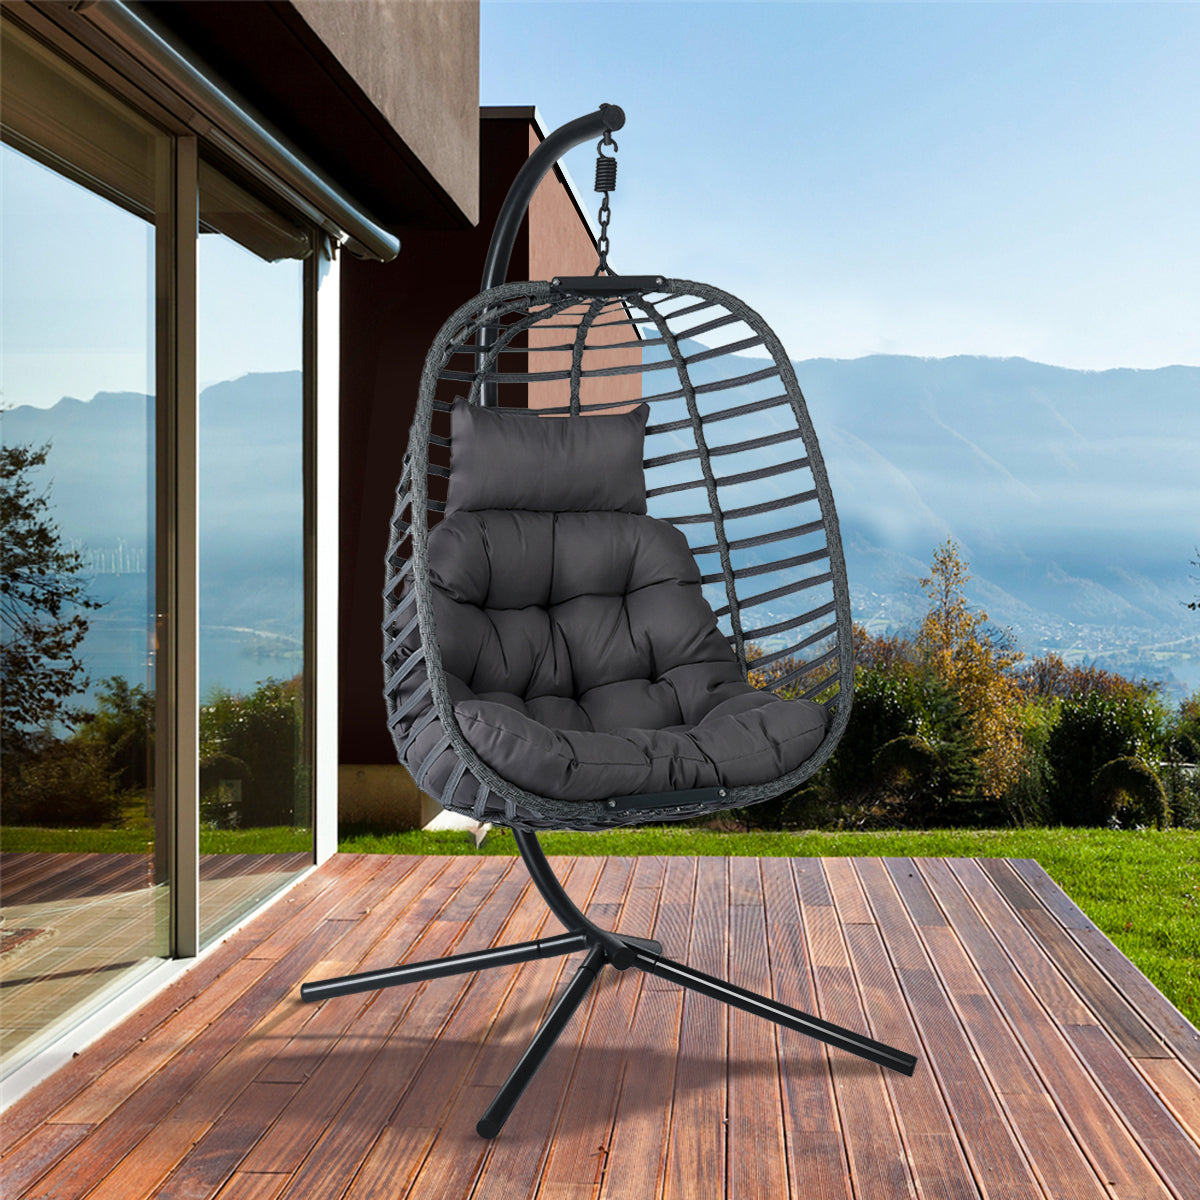 Resin Wicker Hanging Egg Chair with Cushion and Stand, Heavy Duty Swing Chair Backyard Relax, UV Resistant Outdoor Indoor Patio Hanging Egg Chair with Aluminum Frame, Holds 350lbs